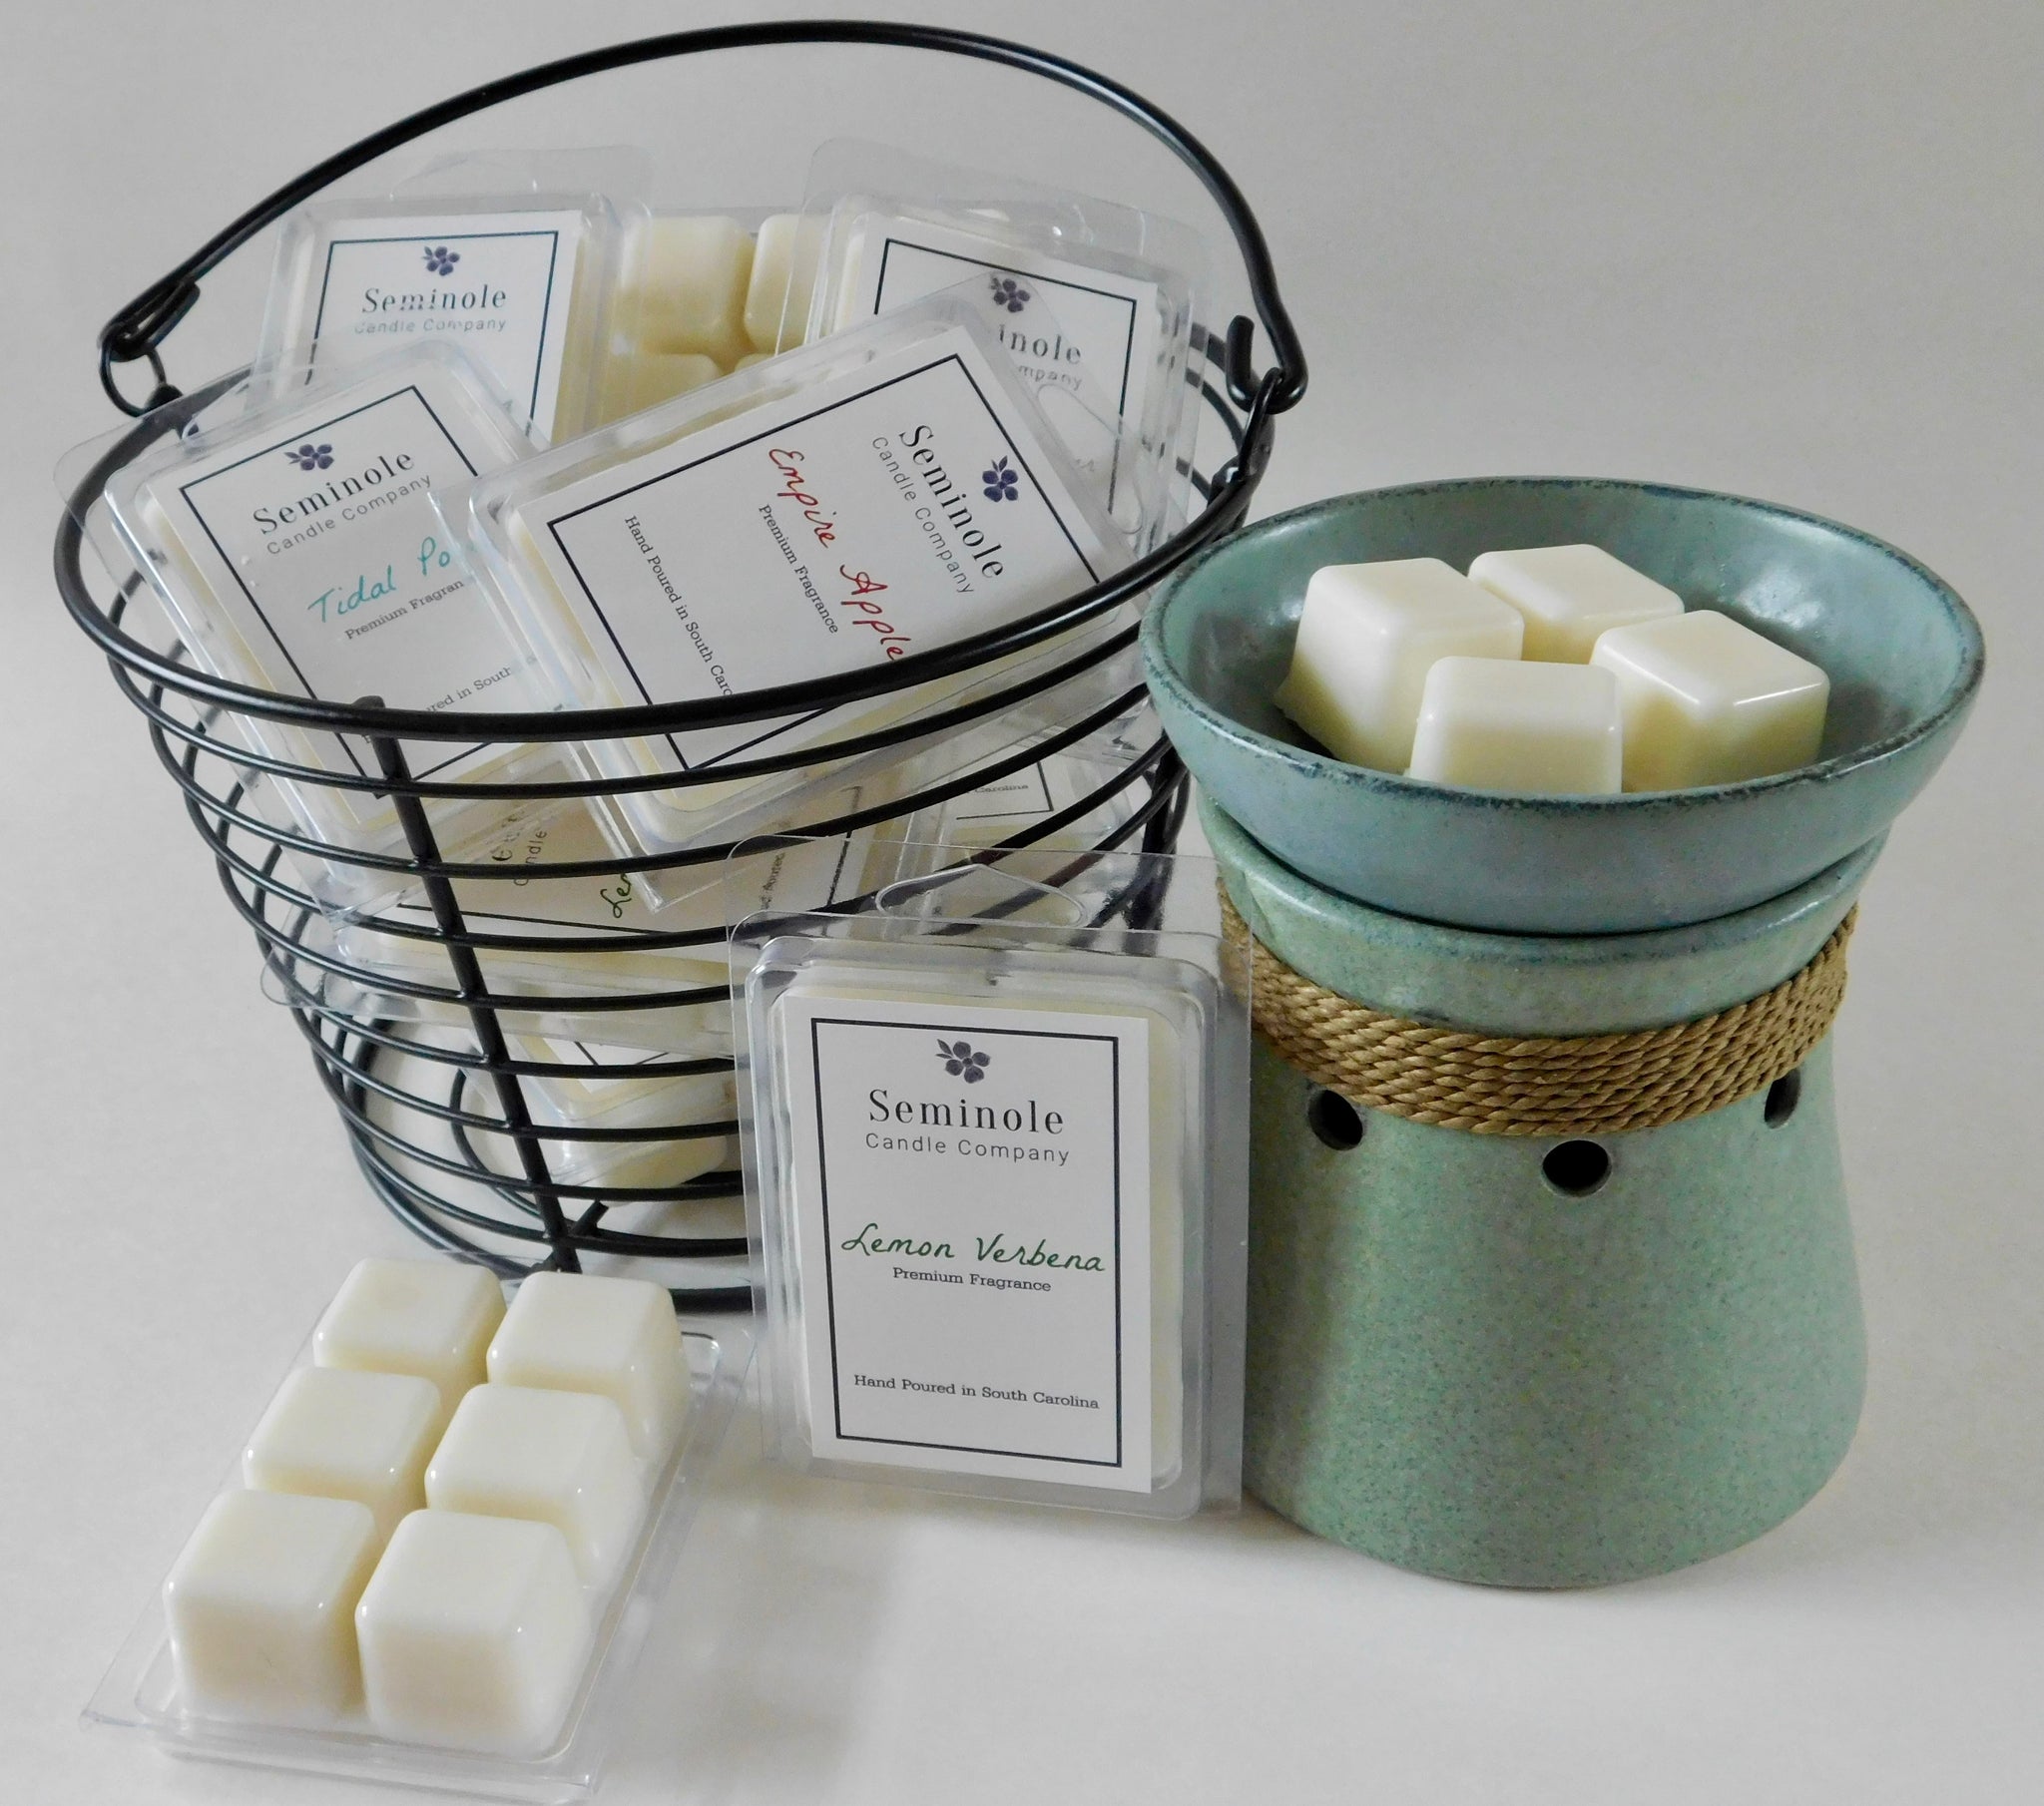 Summer Meadow Soy Wax Blend Scented Wax Melts  Fresh Cut Grass Scente –  West Michigan Candle Co.